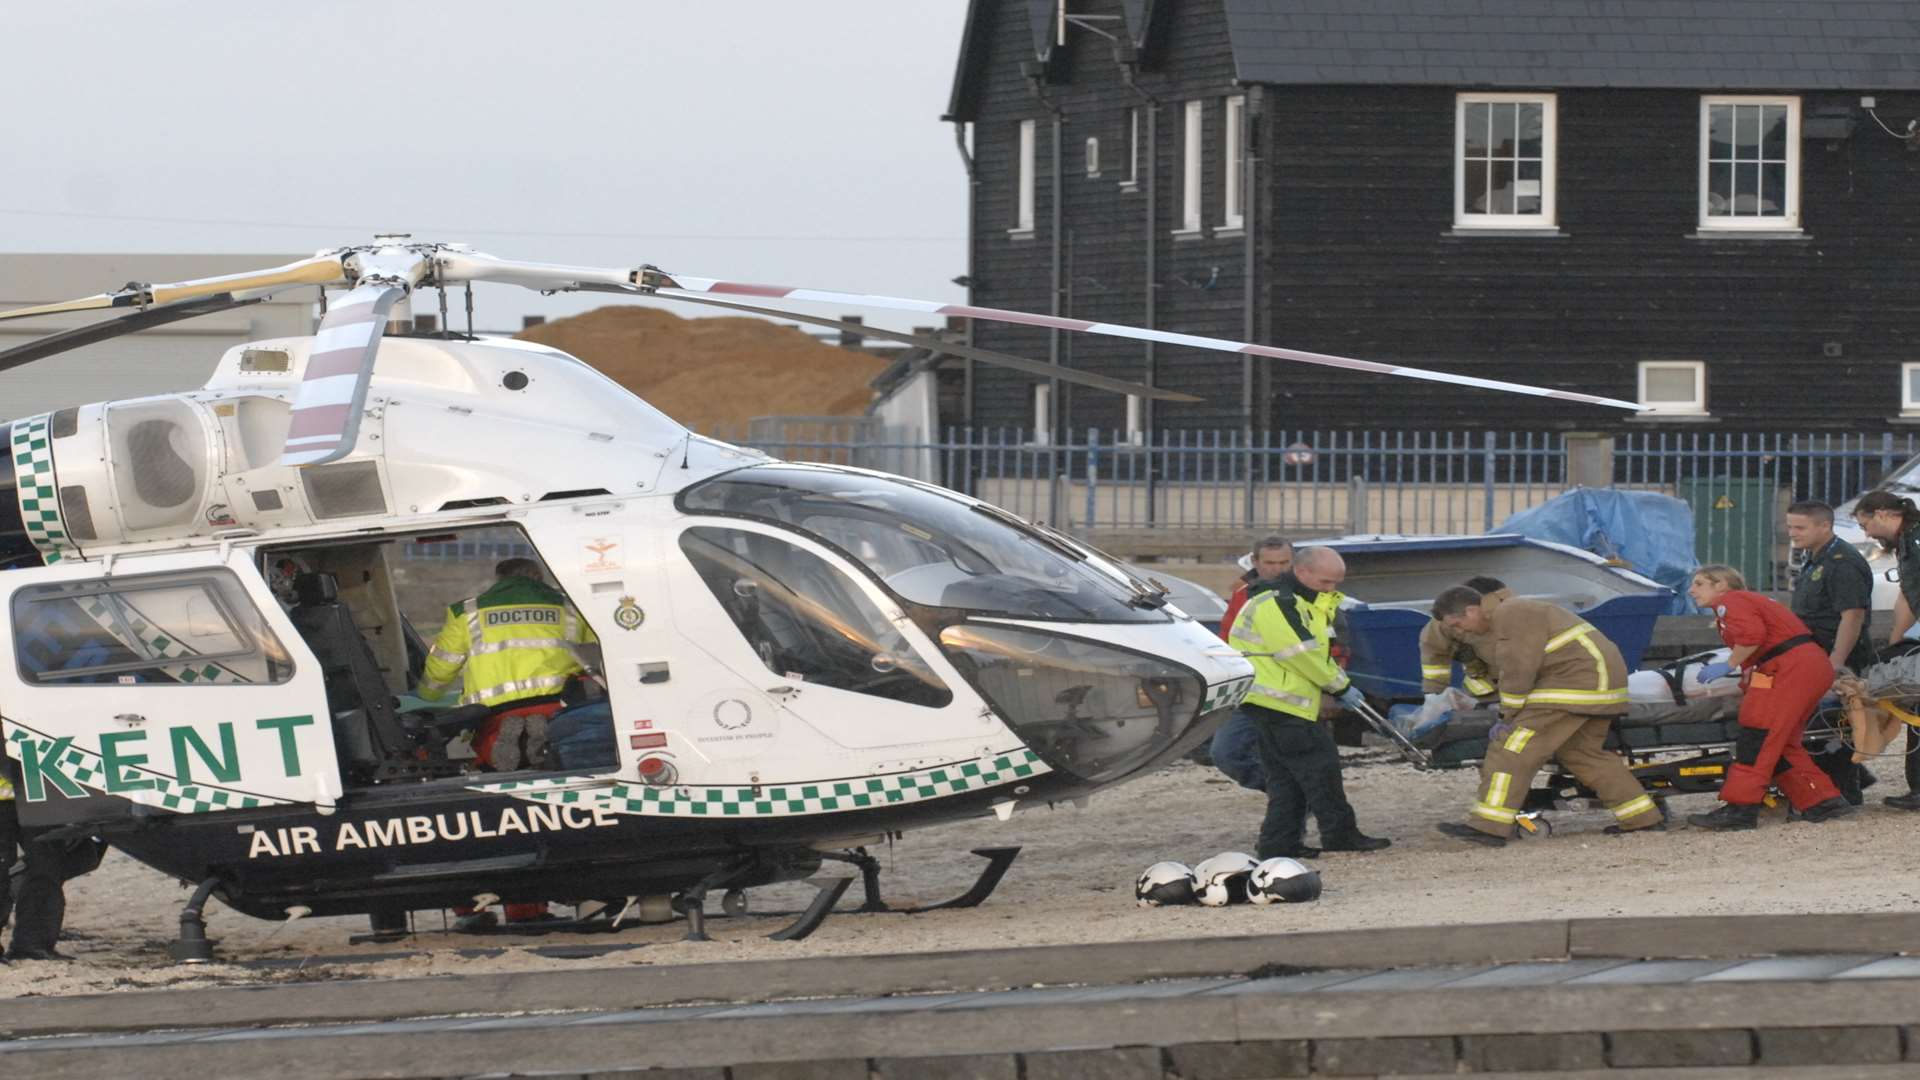 The air ambulance landed on the beach